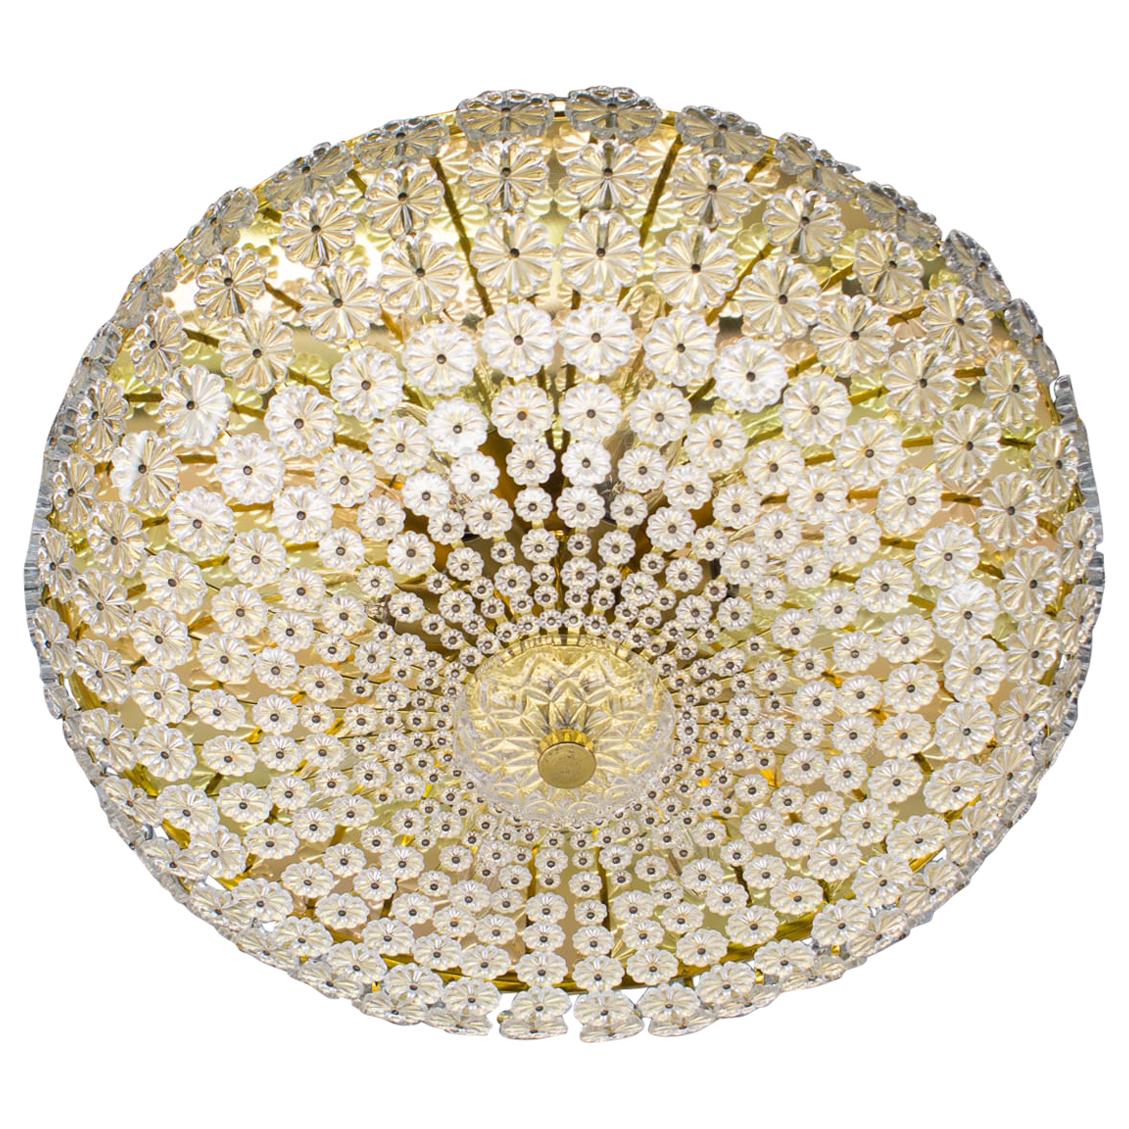 Huge Mid-Century Modern Floral Glass Wall and Ceiling Lamp, 1960s